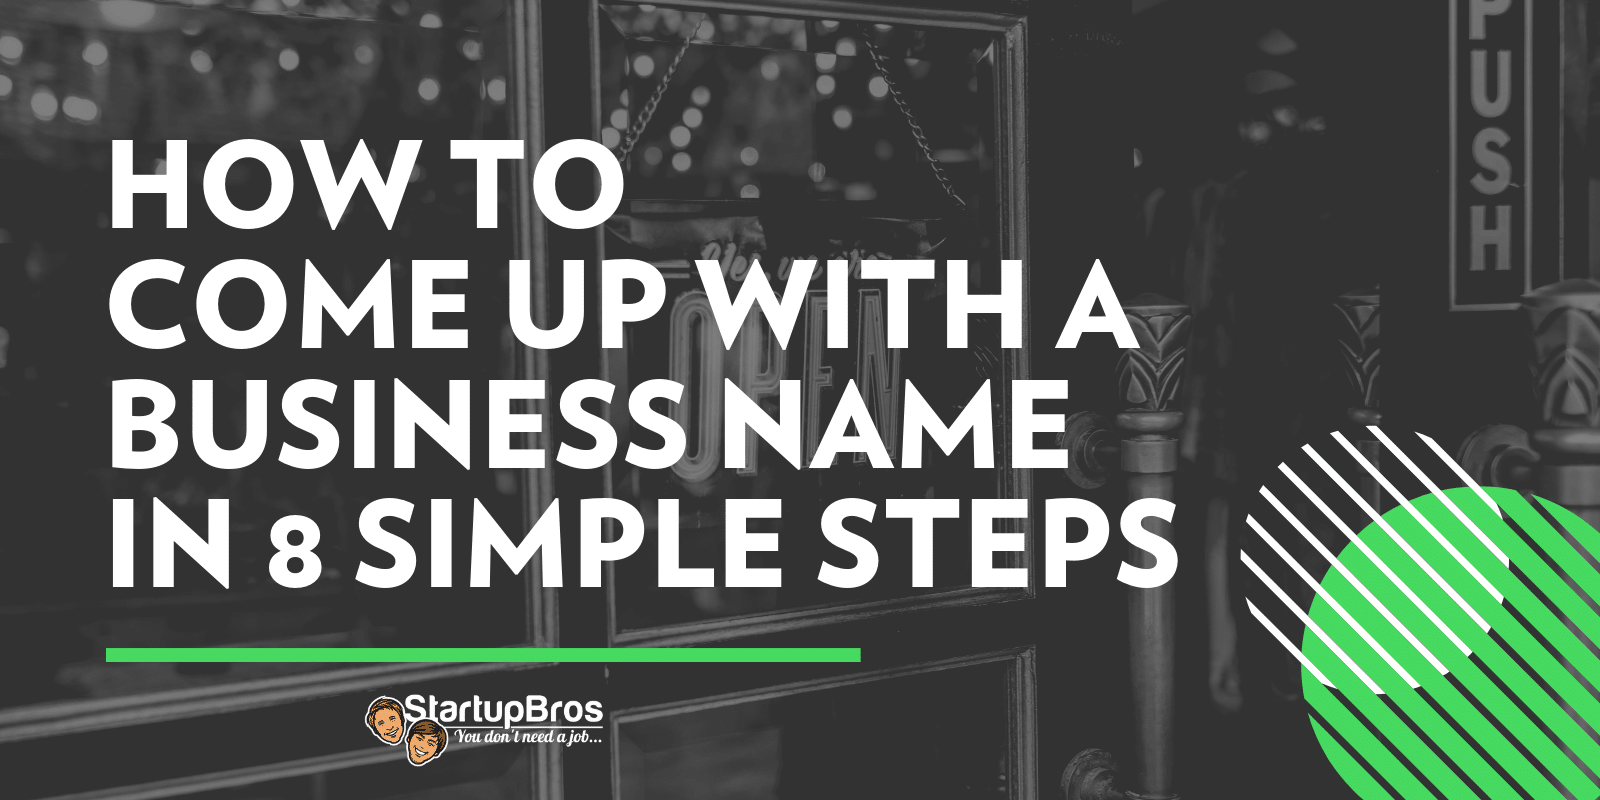 how to come up with a business name in 8 steps - social share image